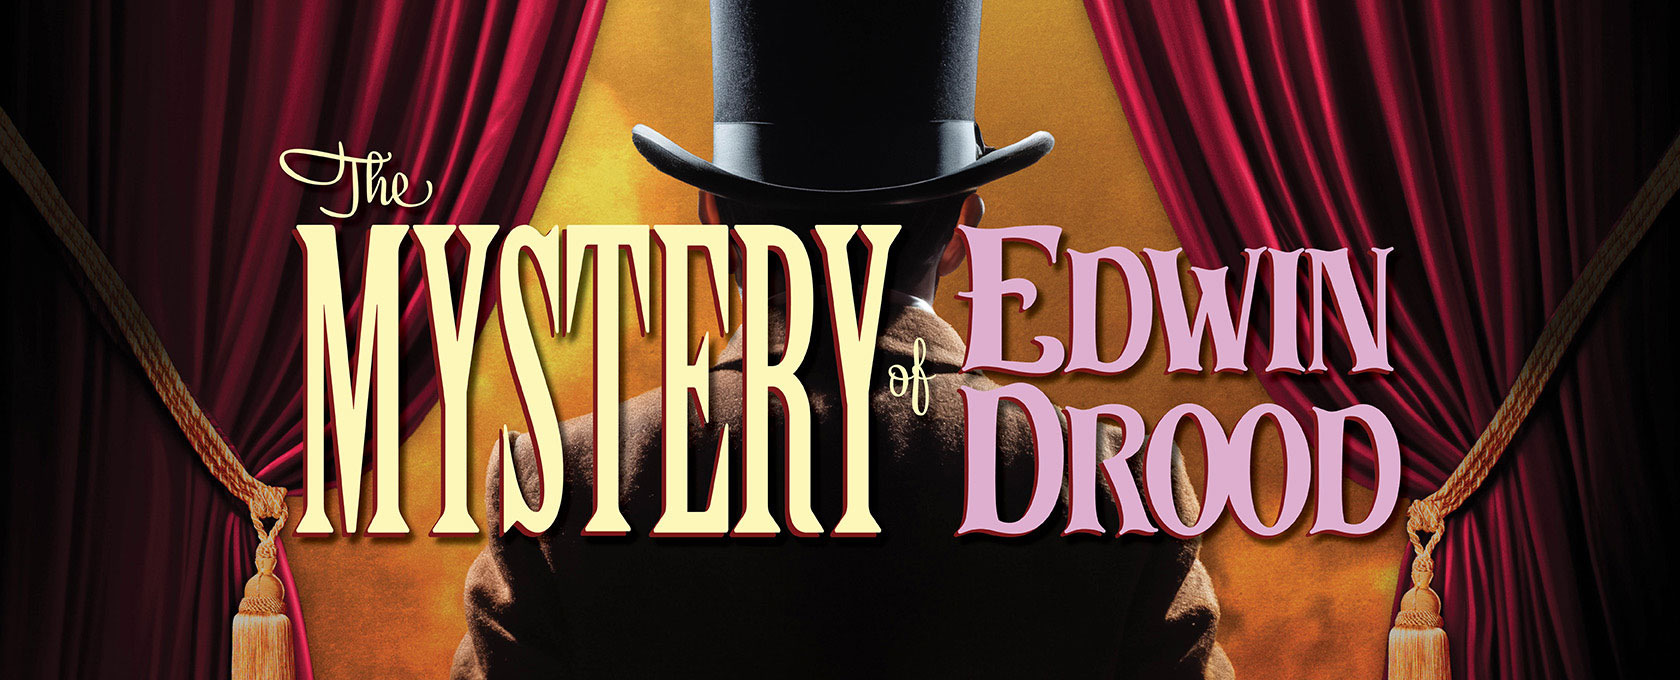 the mystery of edwin drood poster